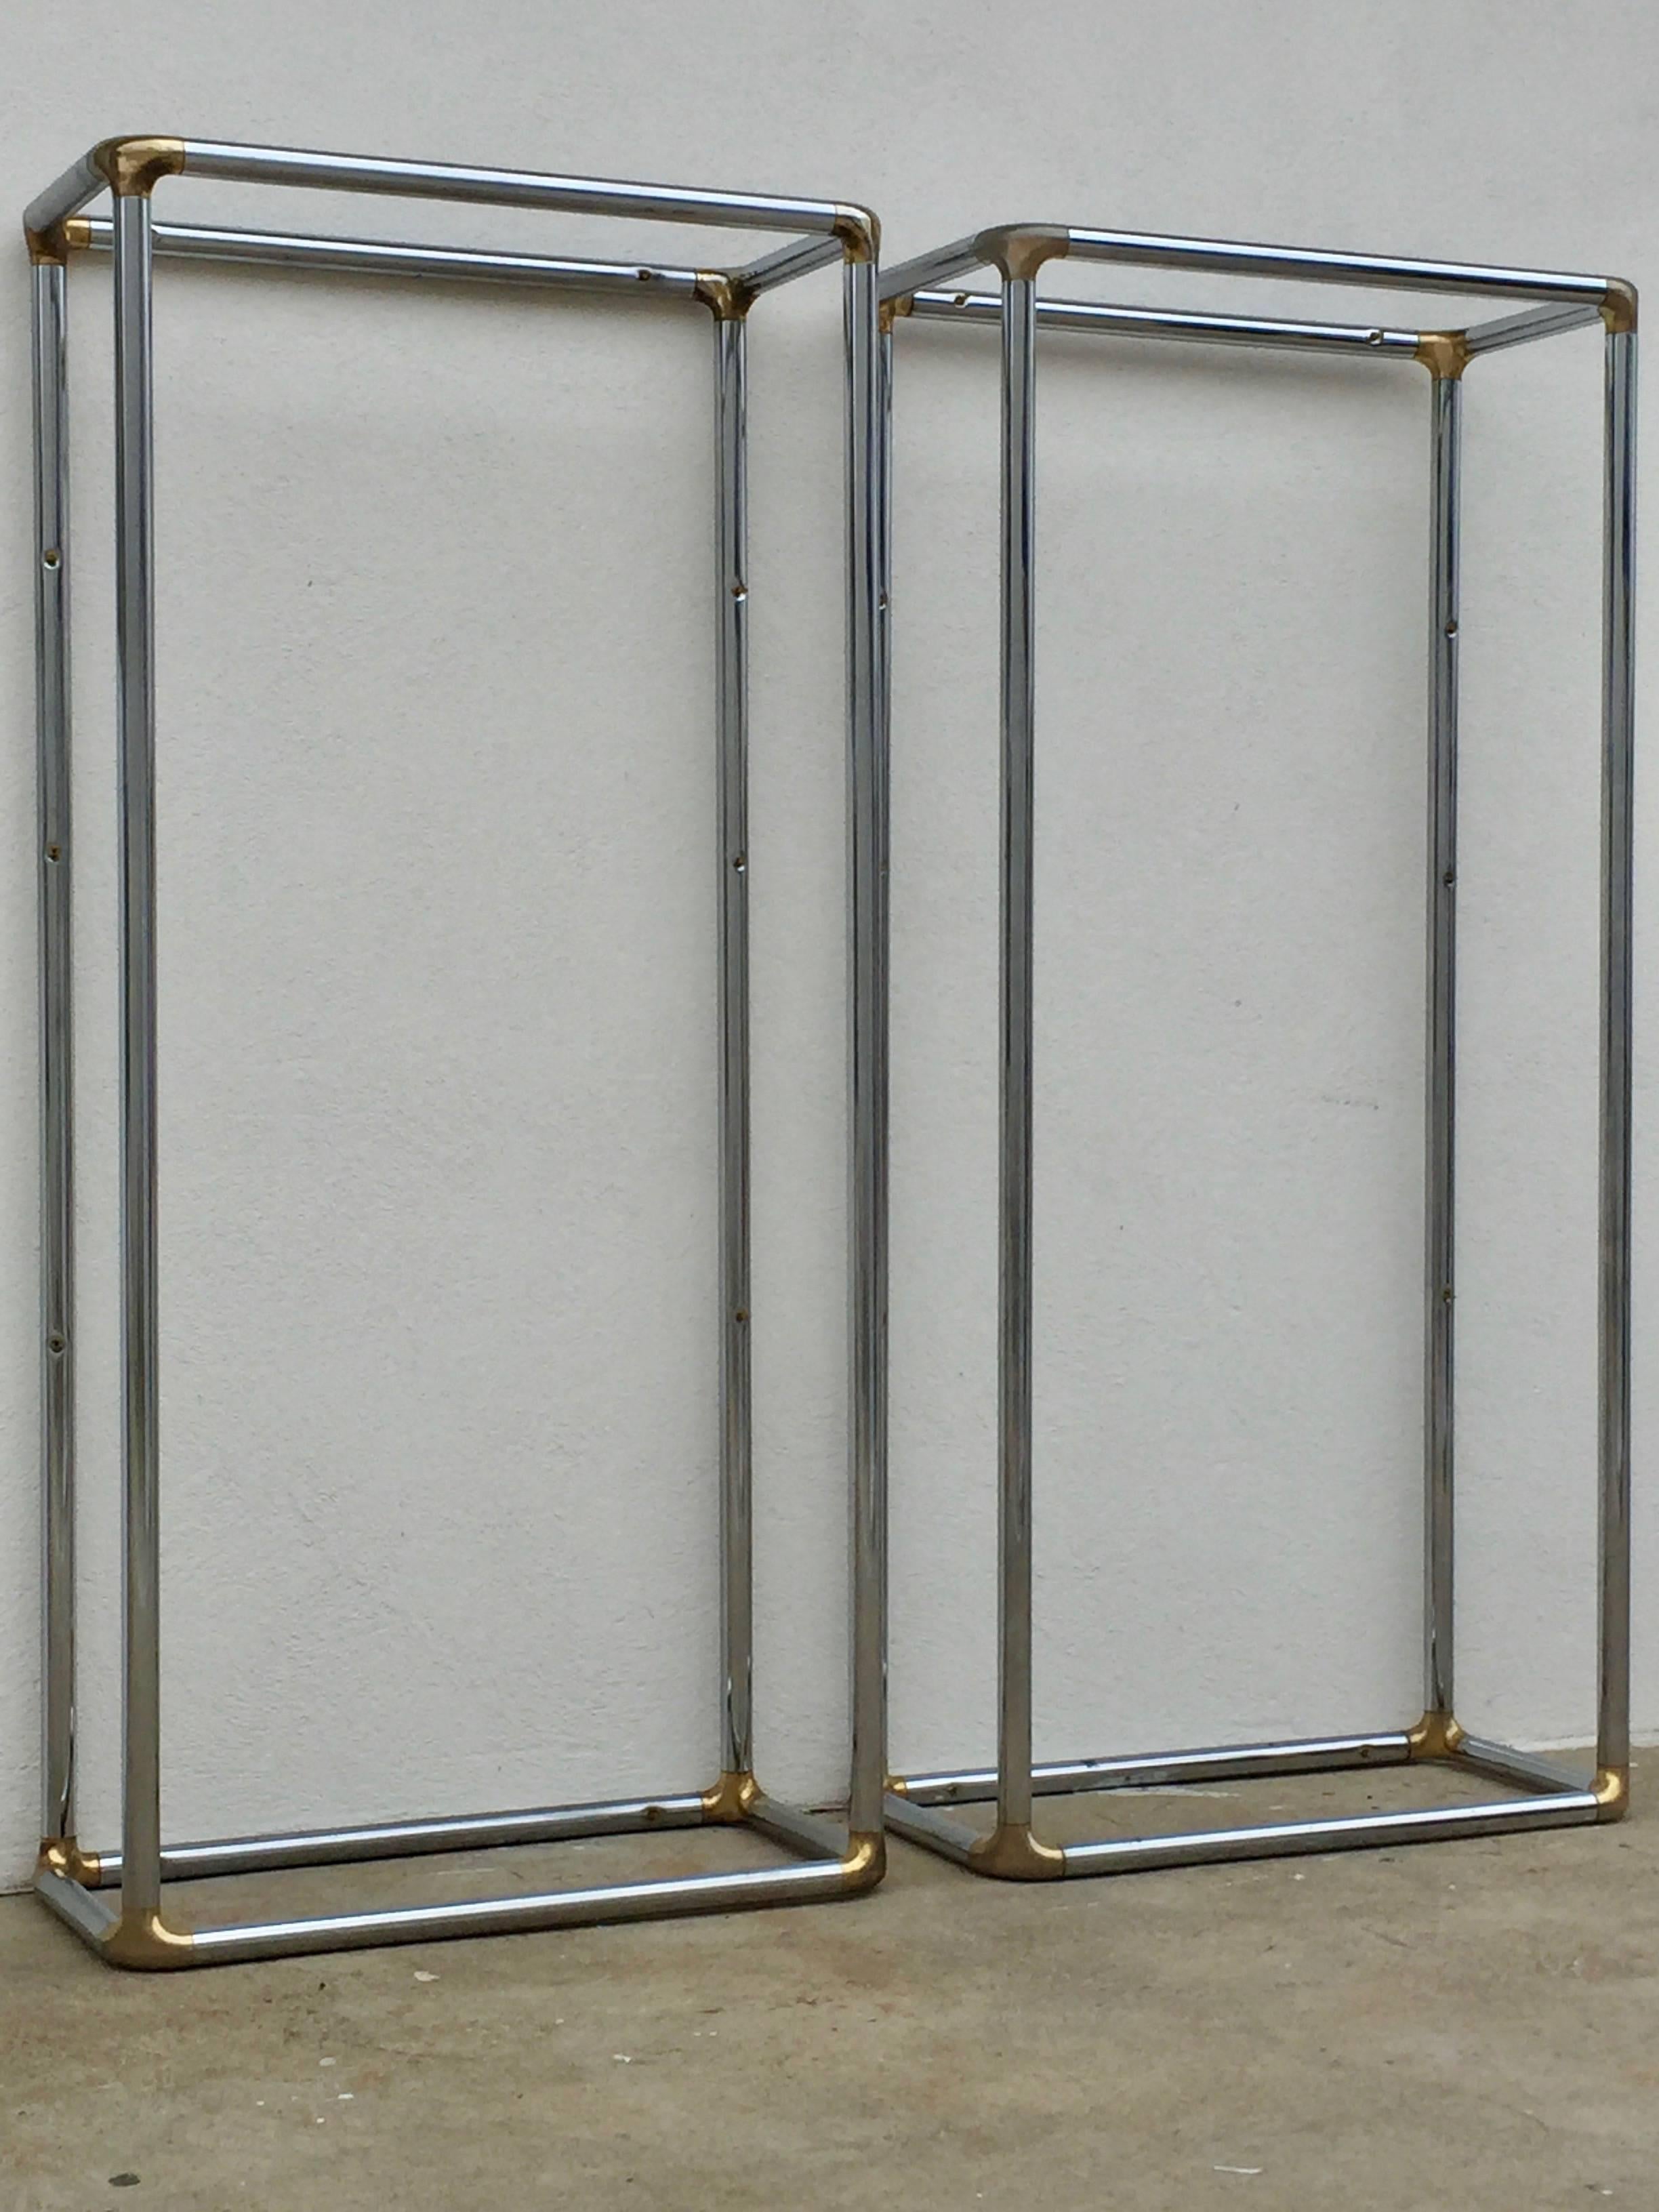 Pair of Tall 1970s Chrome and Brass Shelving Units or Vitrines 1